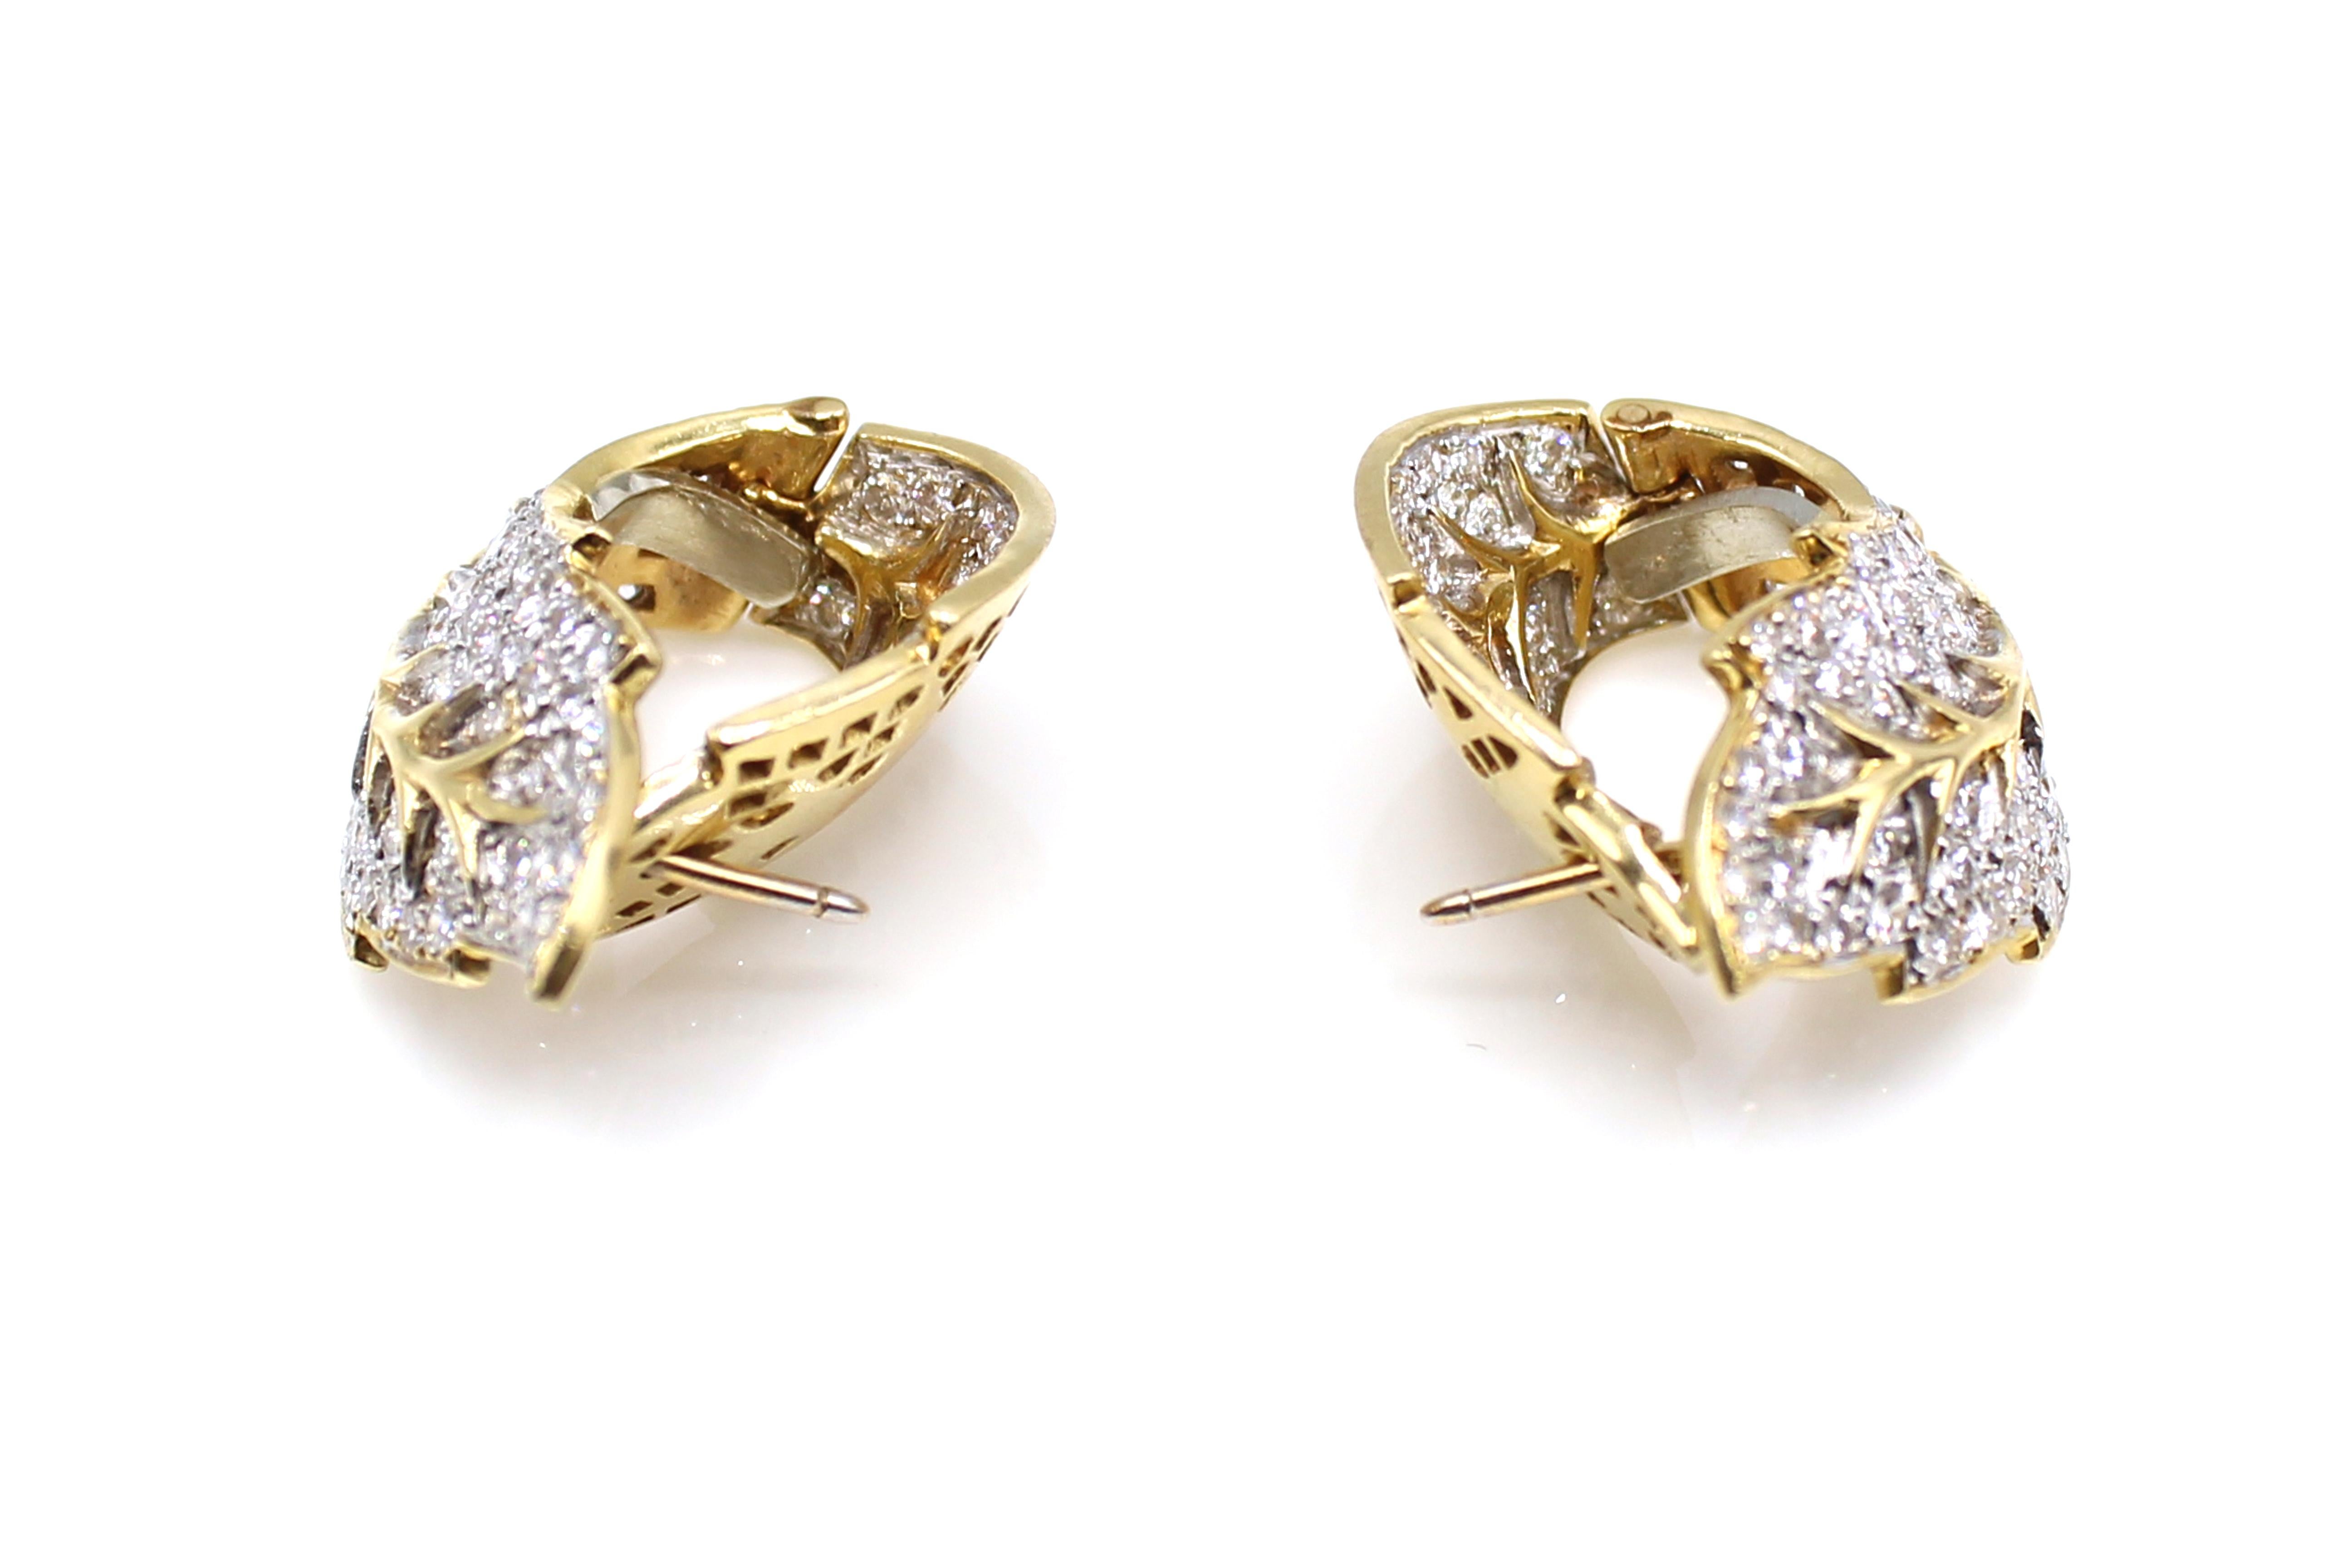 Masterfully handcrafted in 18 karat yellow gold, these ear-clips are beautifully designed as life-like leaves. Slightly curved these ear-clips have a three-dimensional feel and the bright white and sparkly diamonds bring this piece of jewelry to